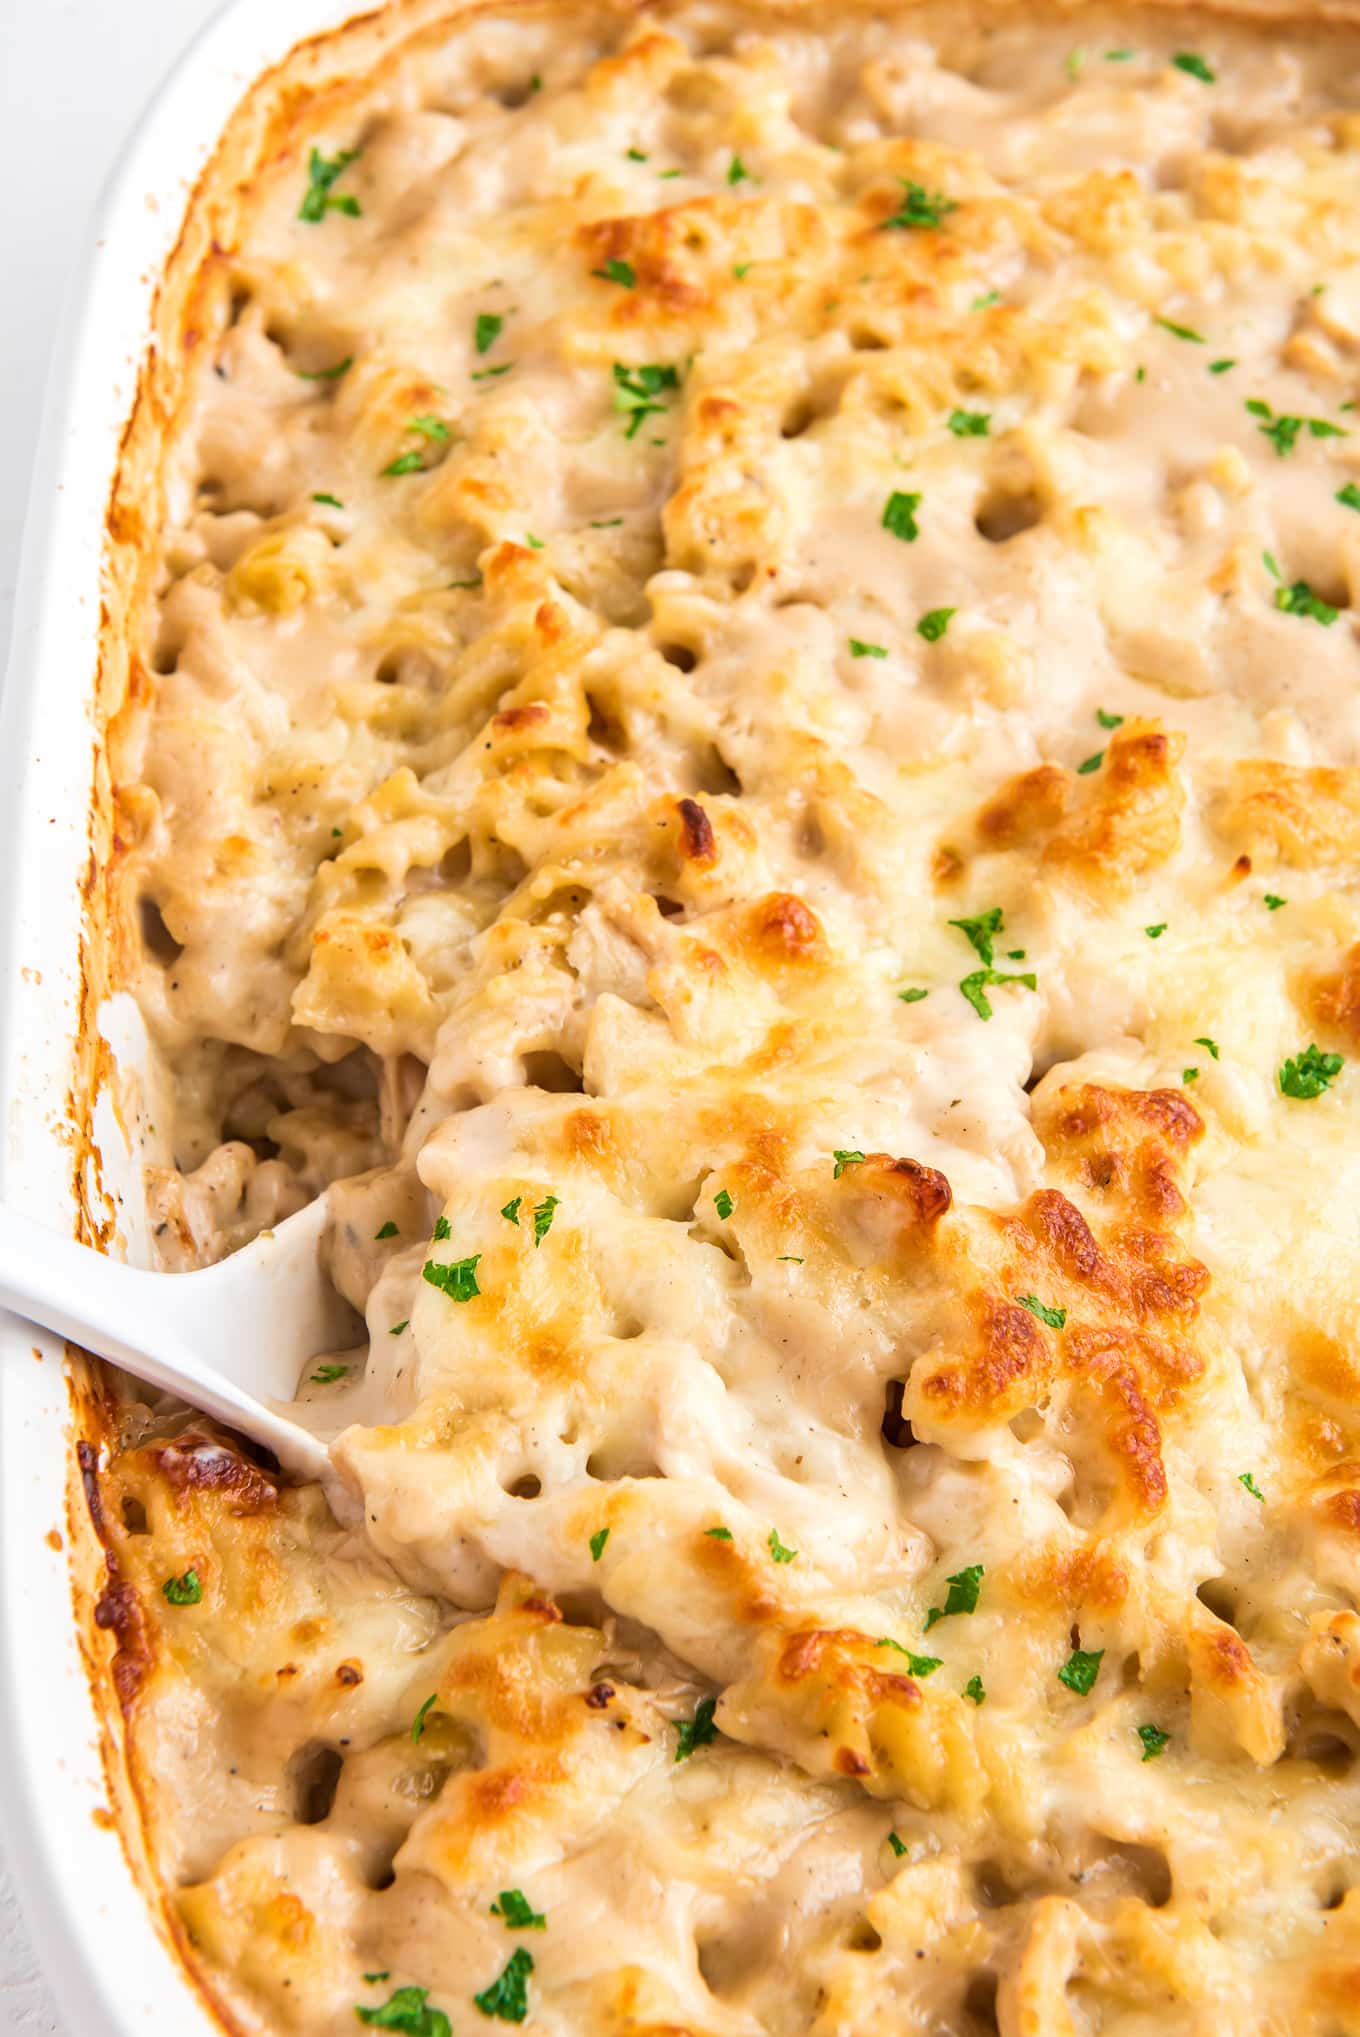 A casserole dish scooping up a portion of baked chicken alfredo.